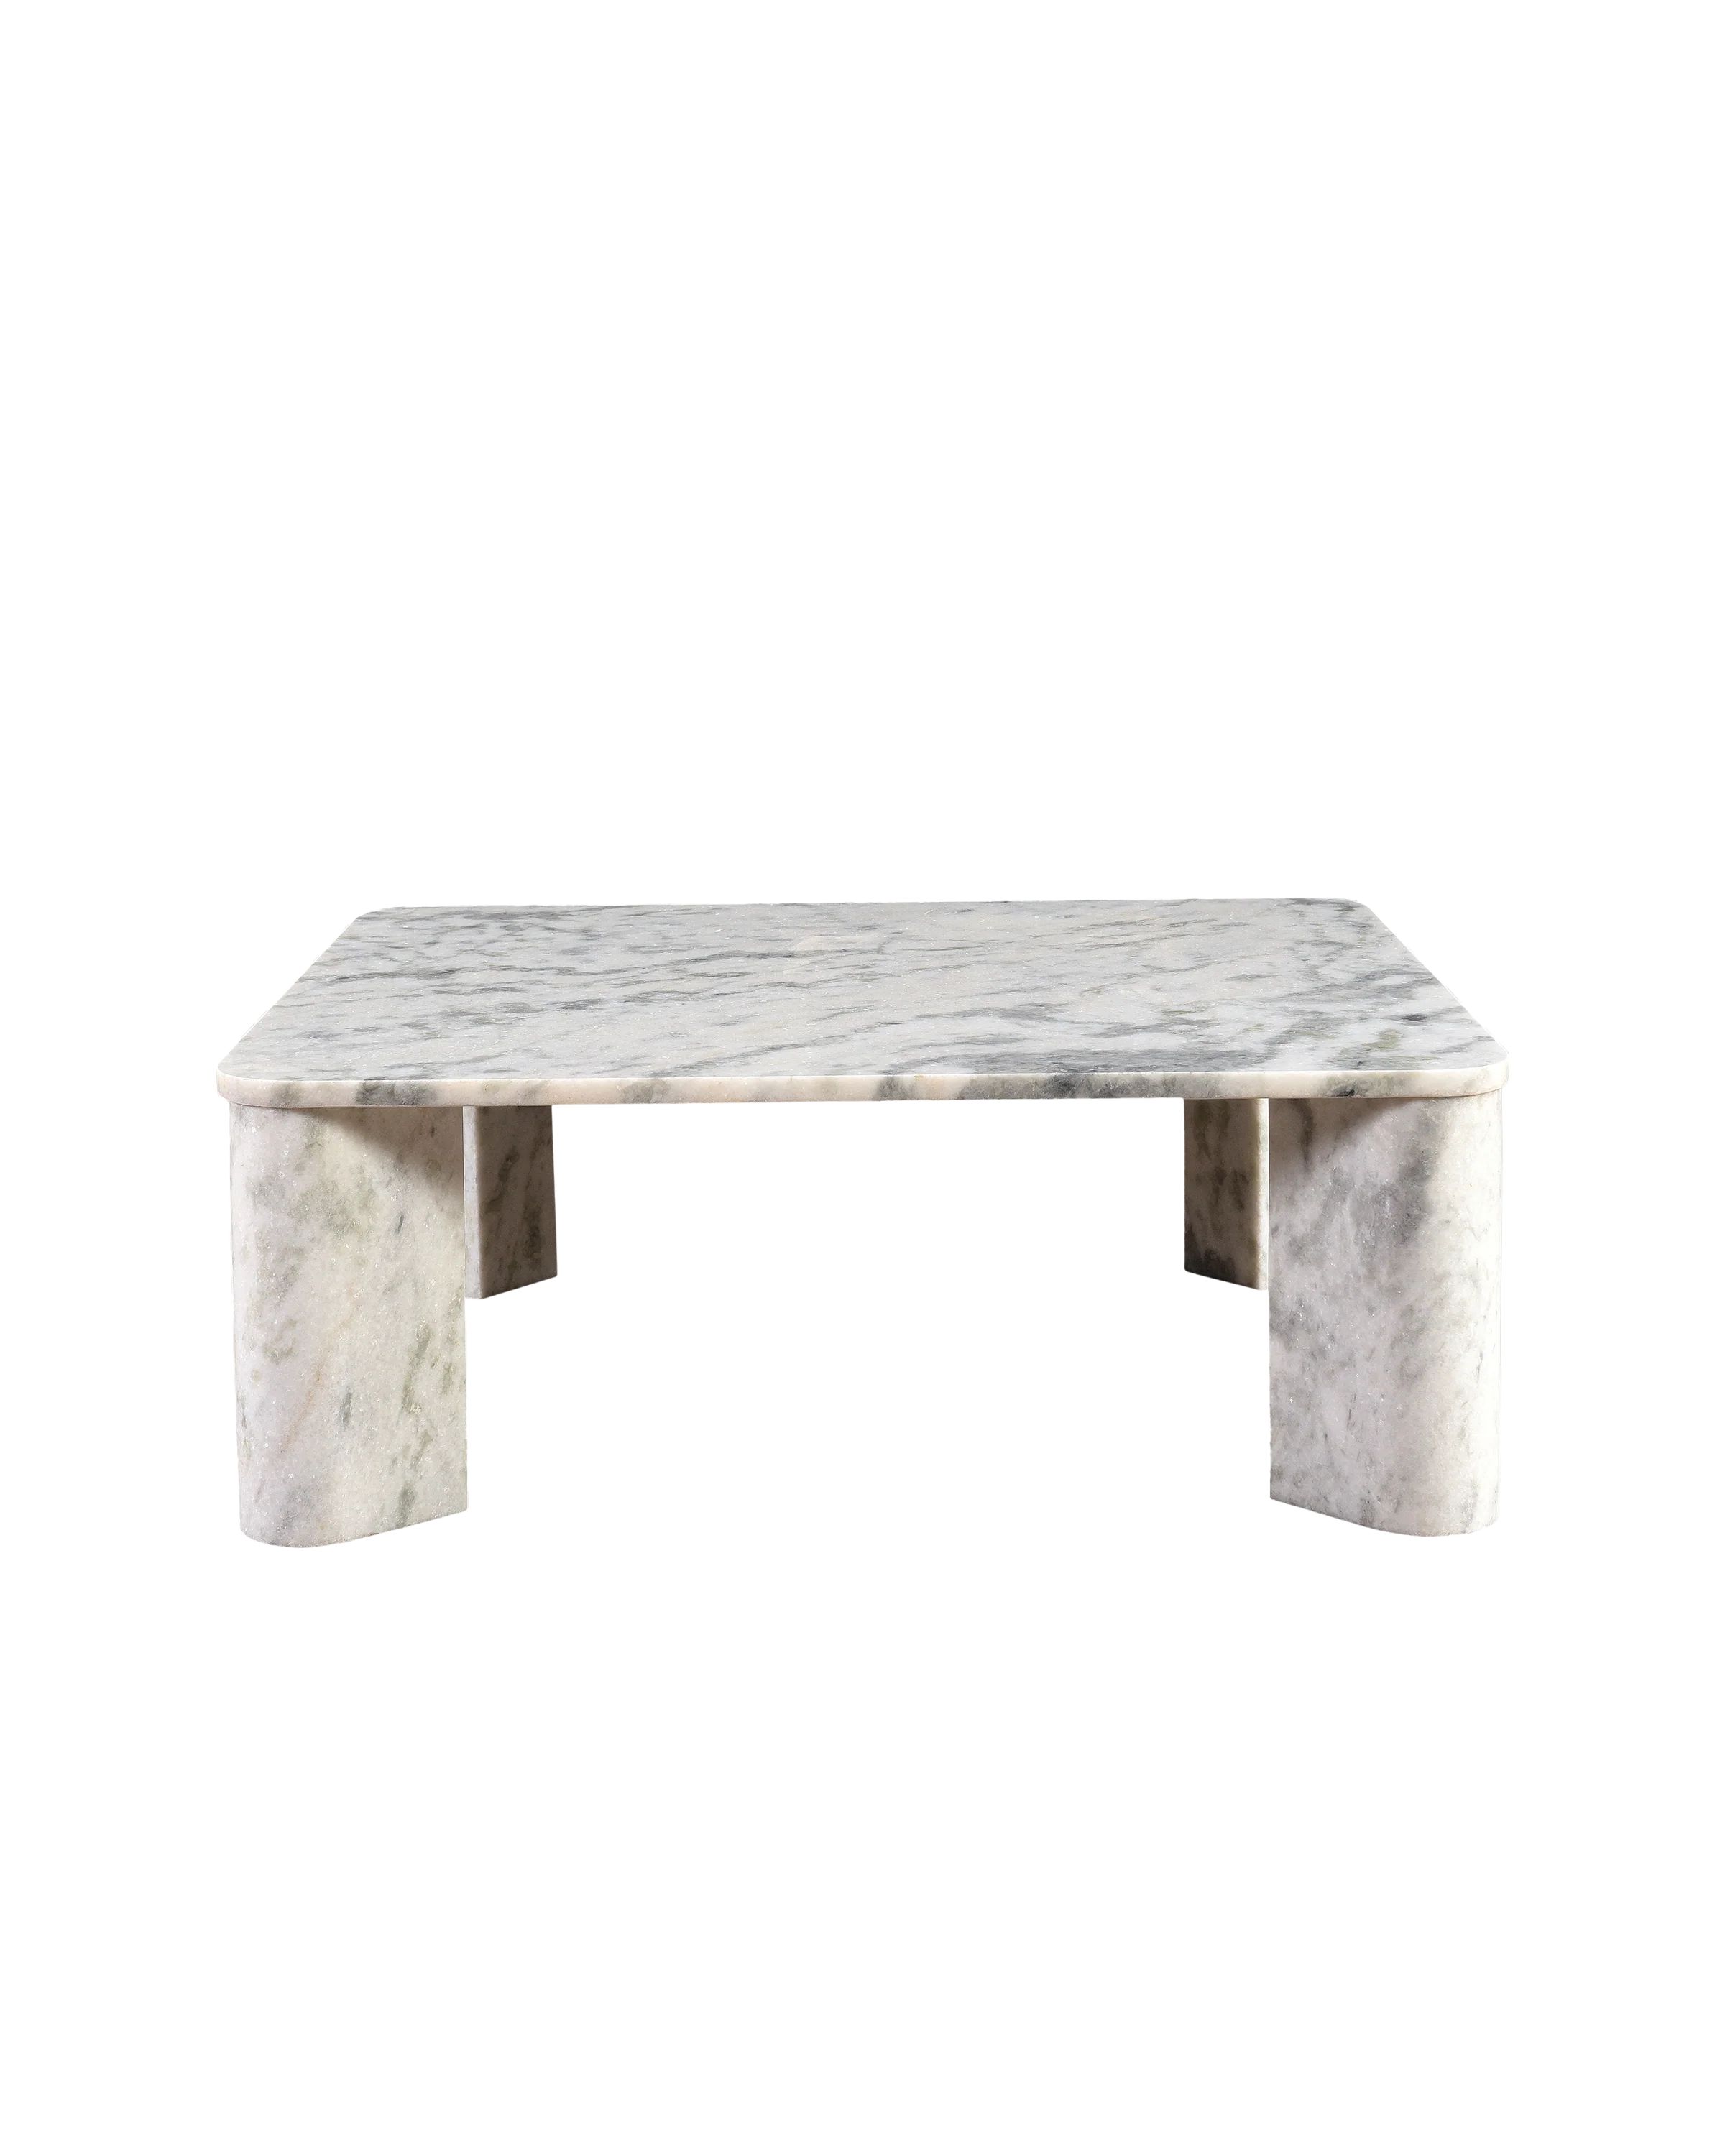 ENCLAVE ASHEN GREY MARBLE TABLE | Off-White Palette